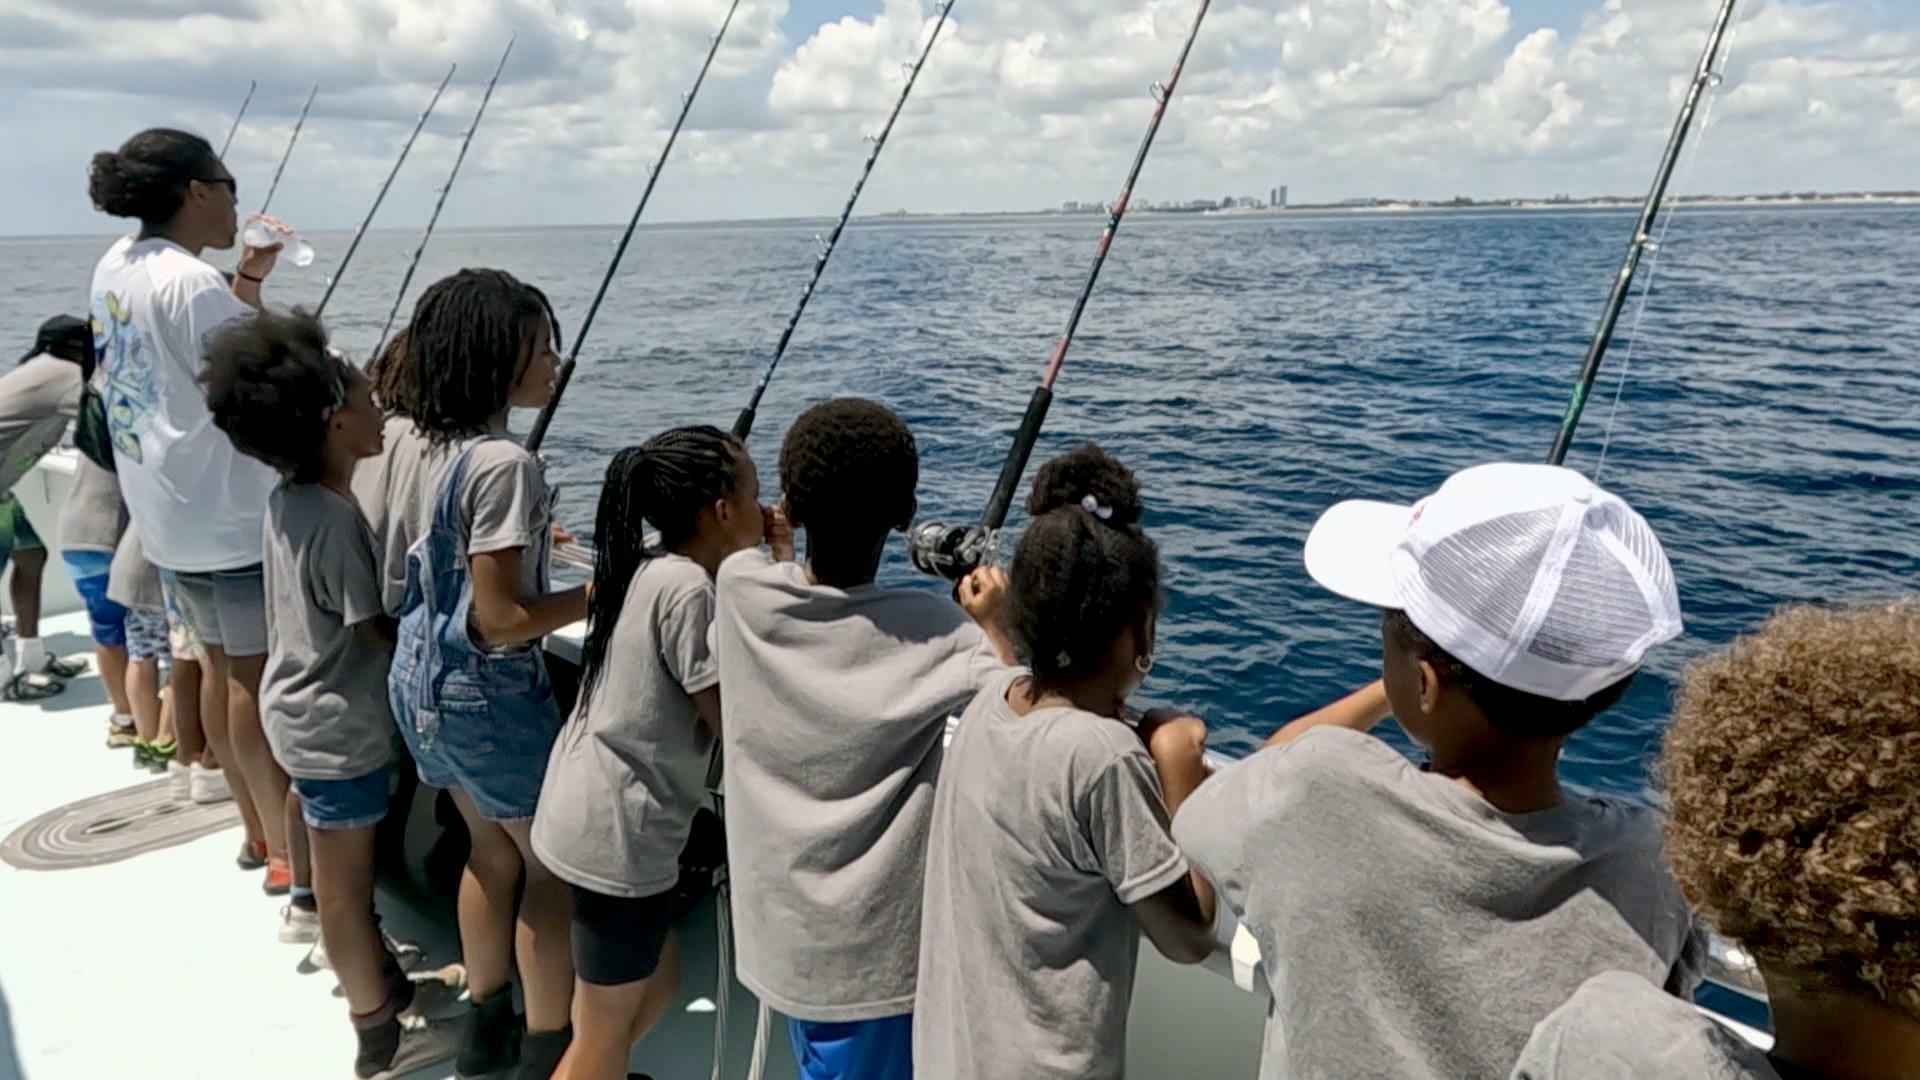 Watch CBS Saturday Morning: The mission of Florida Fishing Academy - Full  show on CBS